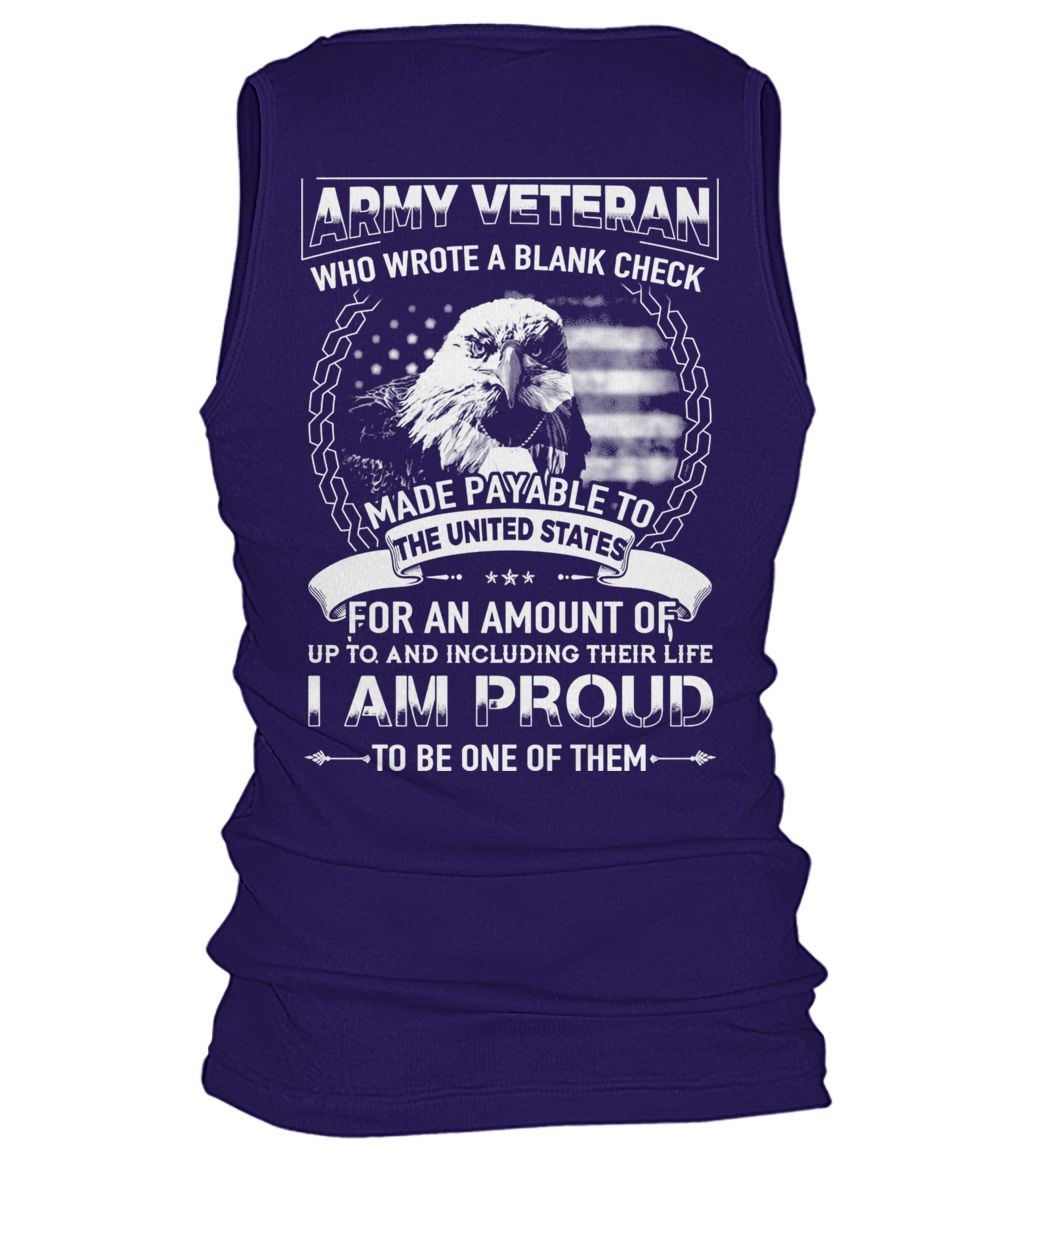 Army veteran who wrote a blank check made payable to the united states men's tank top